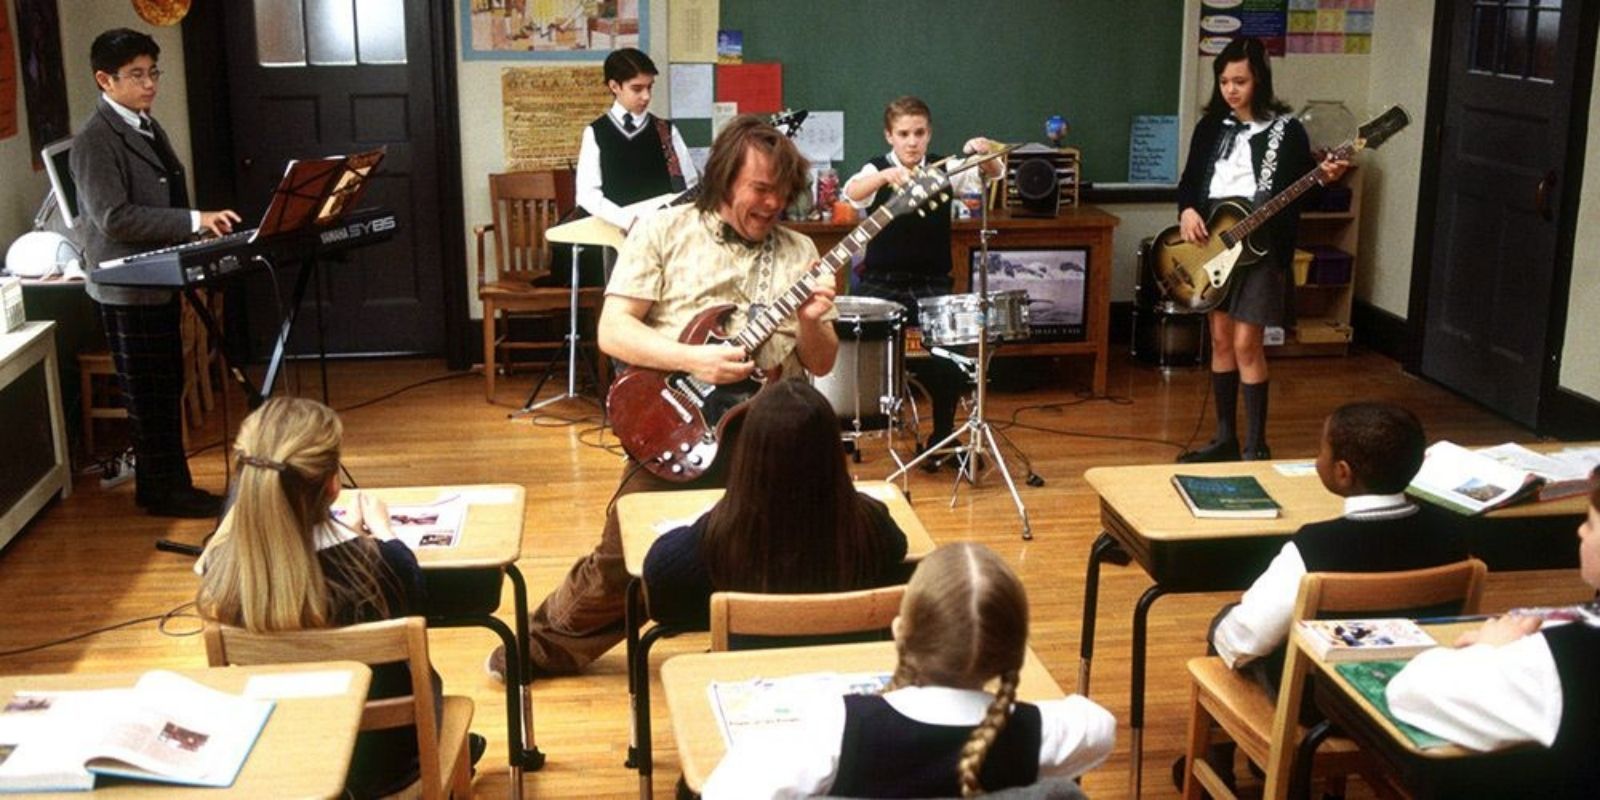 Dewey rocks out with his guitar in front of students